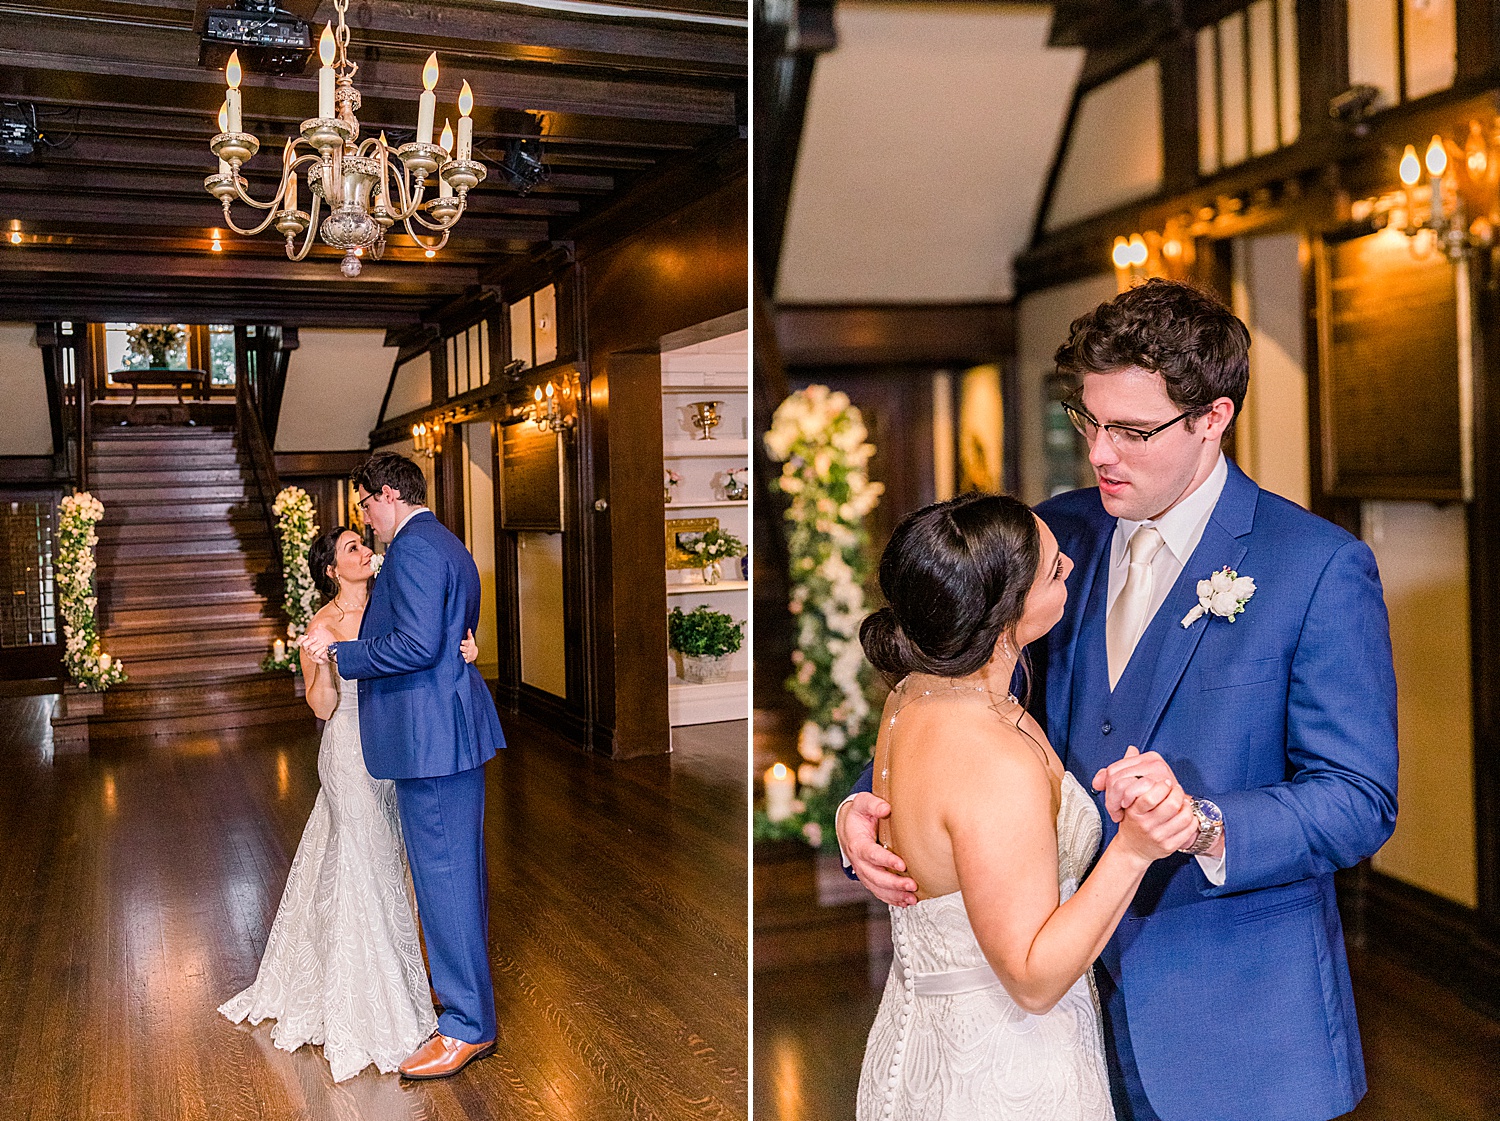 newlyweds share an intimate moment together dancing